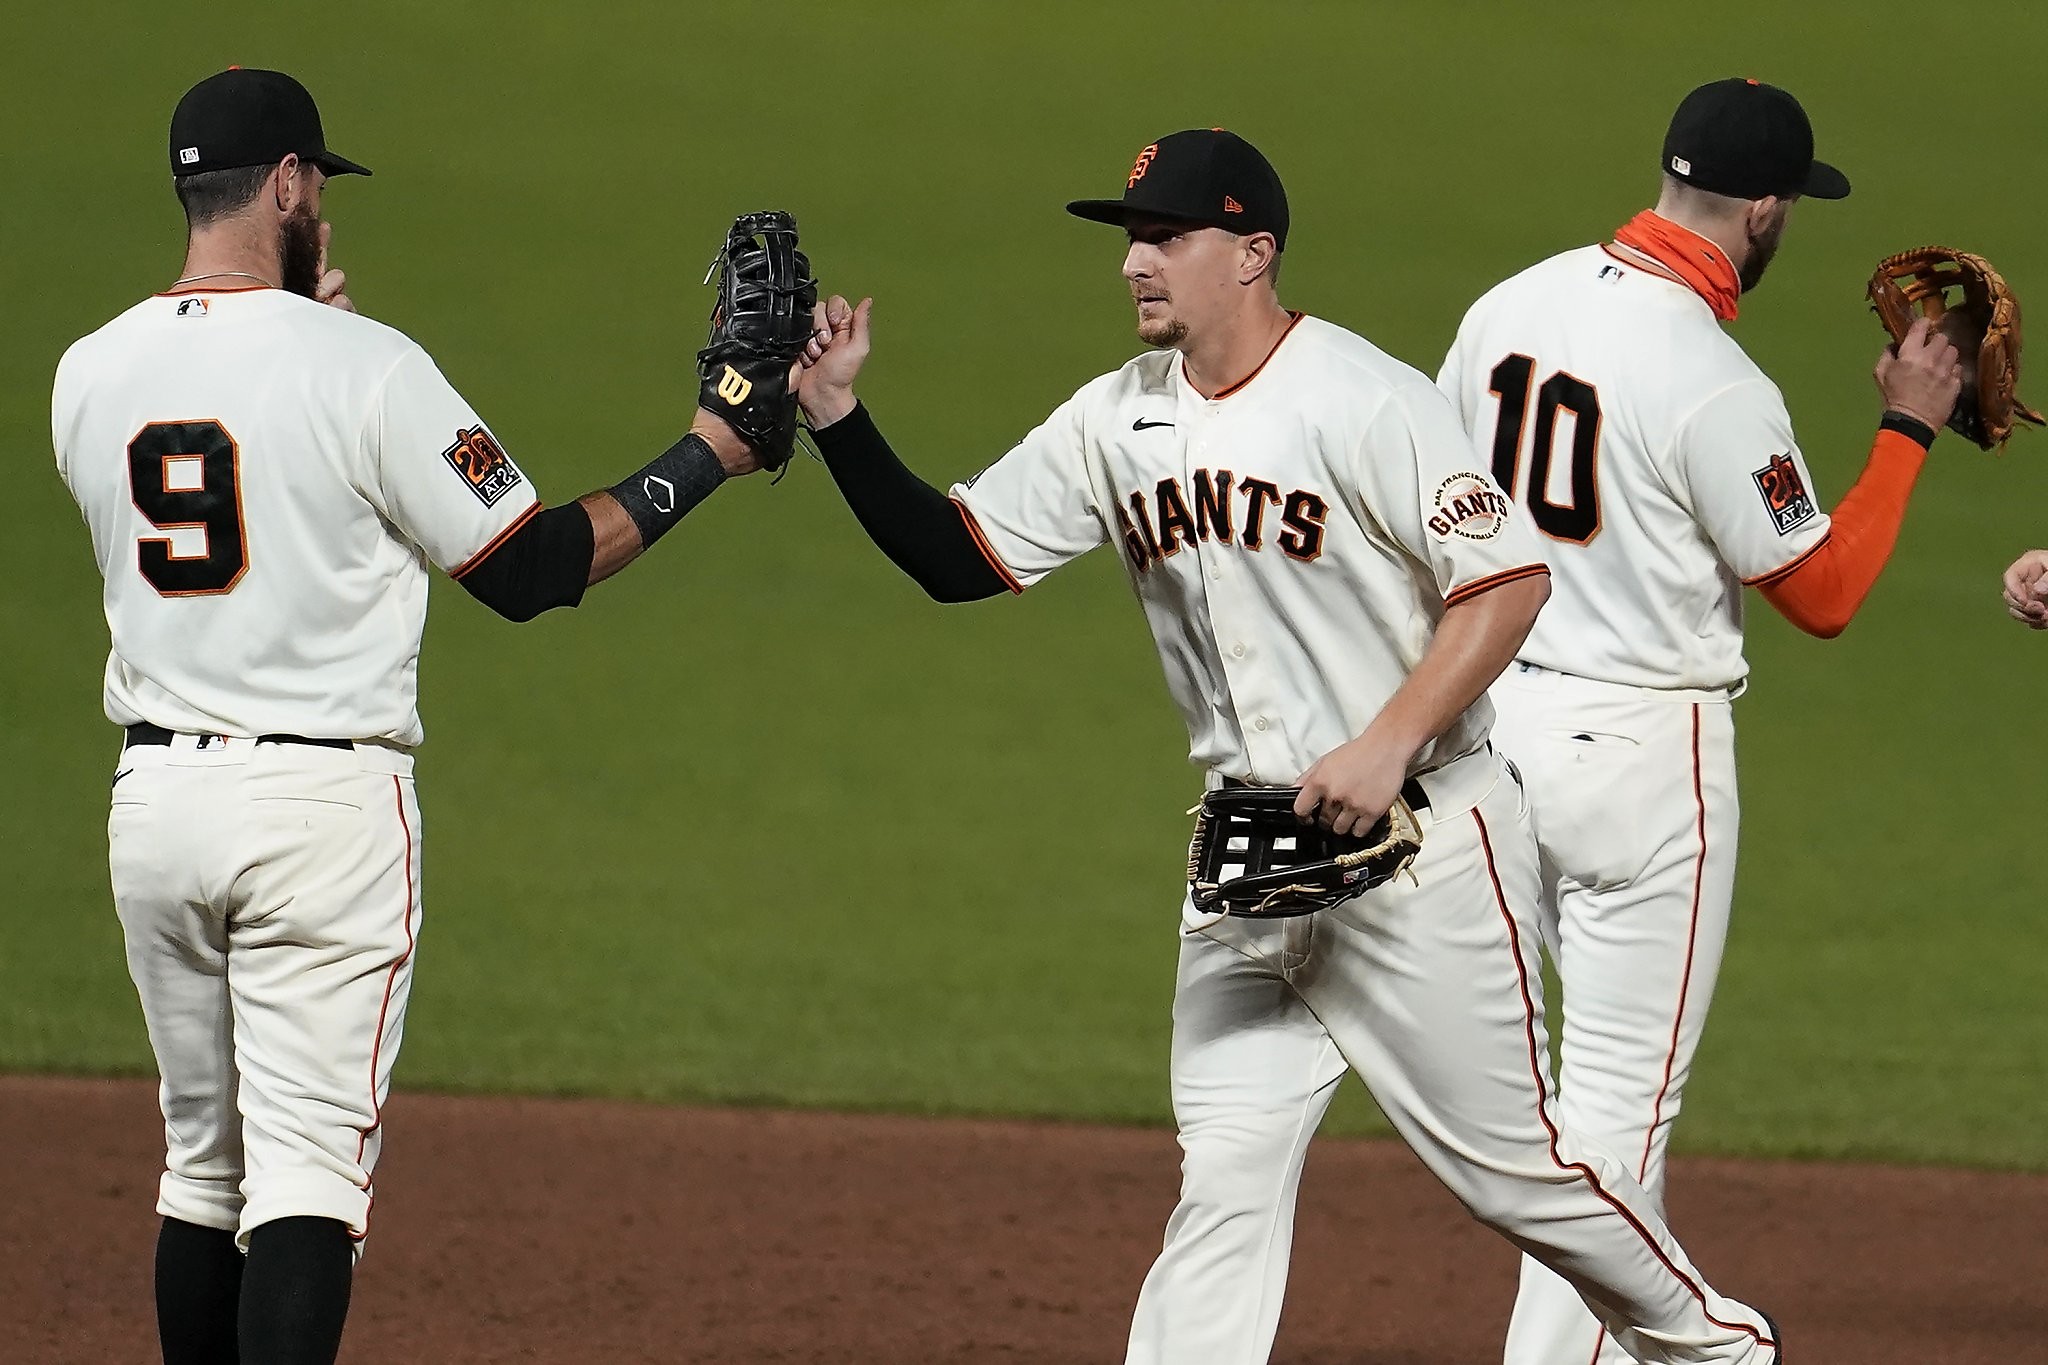 What needs to happen for the SF Giants to make the playoffs?